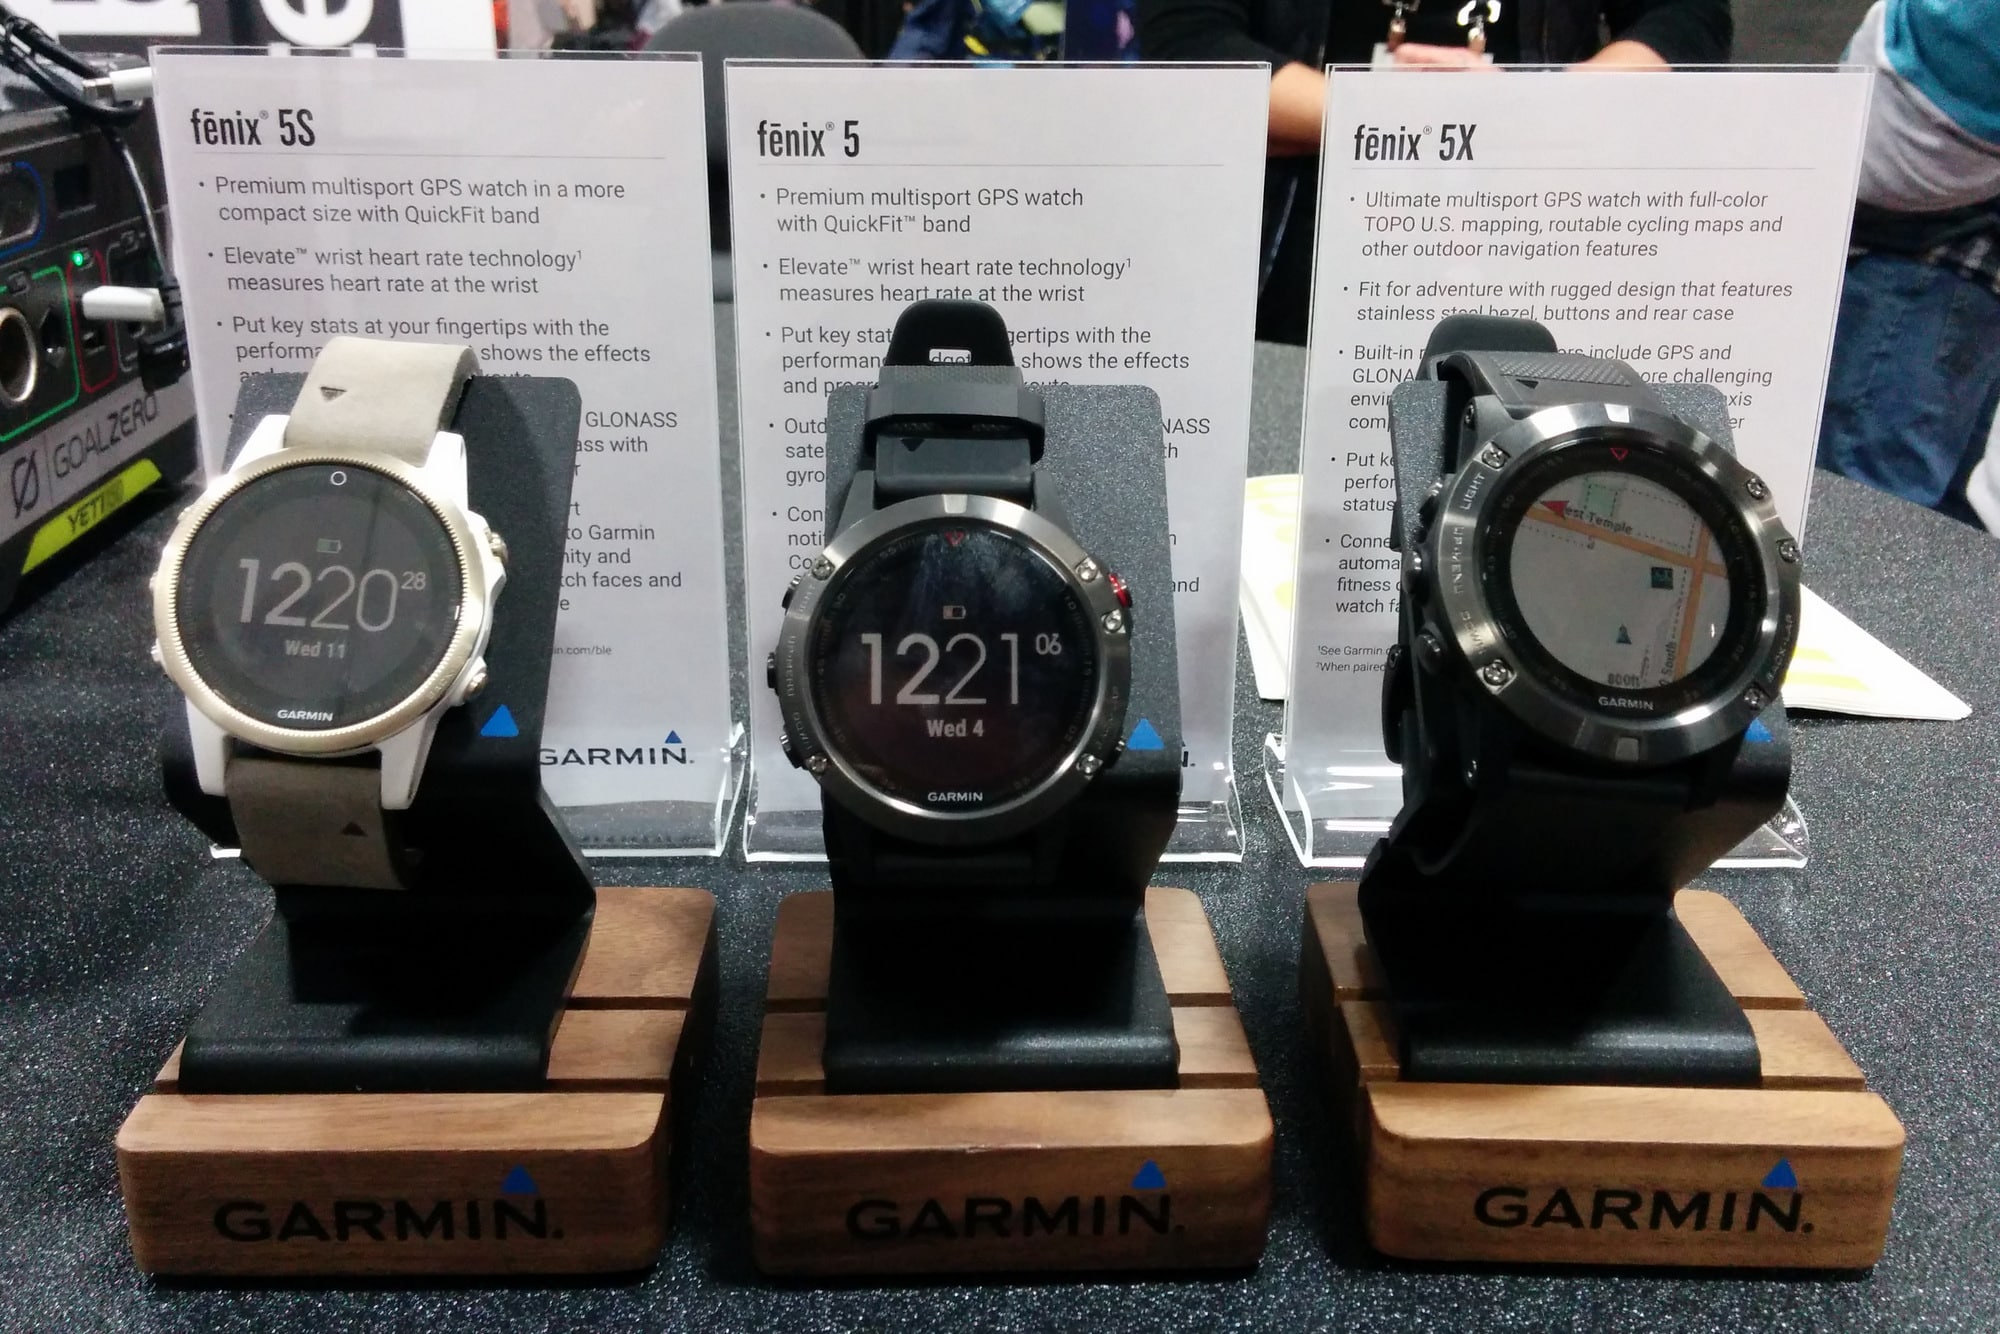 Sportsman load worship Preview: Garmin Fenix 5, 5S, and 5X (with maps!) GPS sport watches